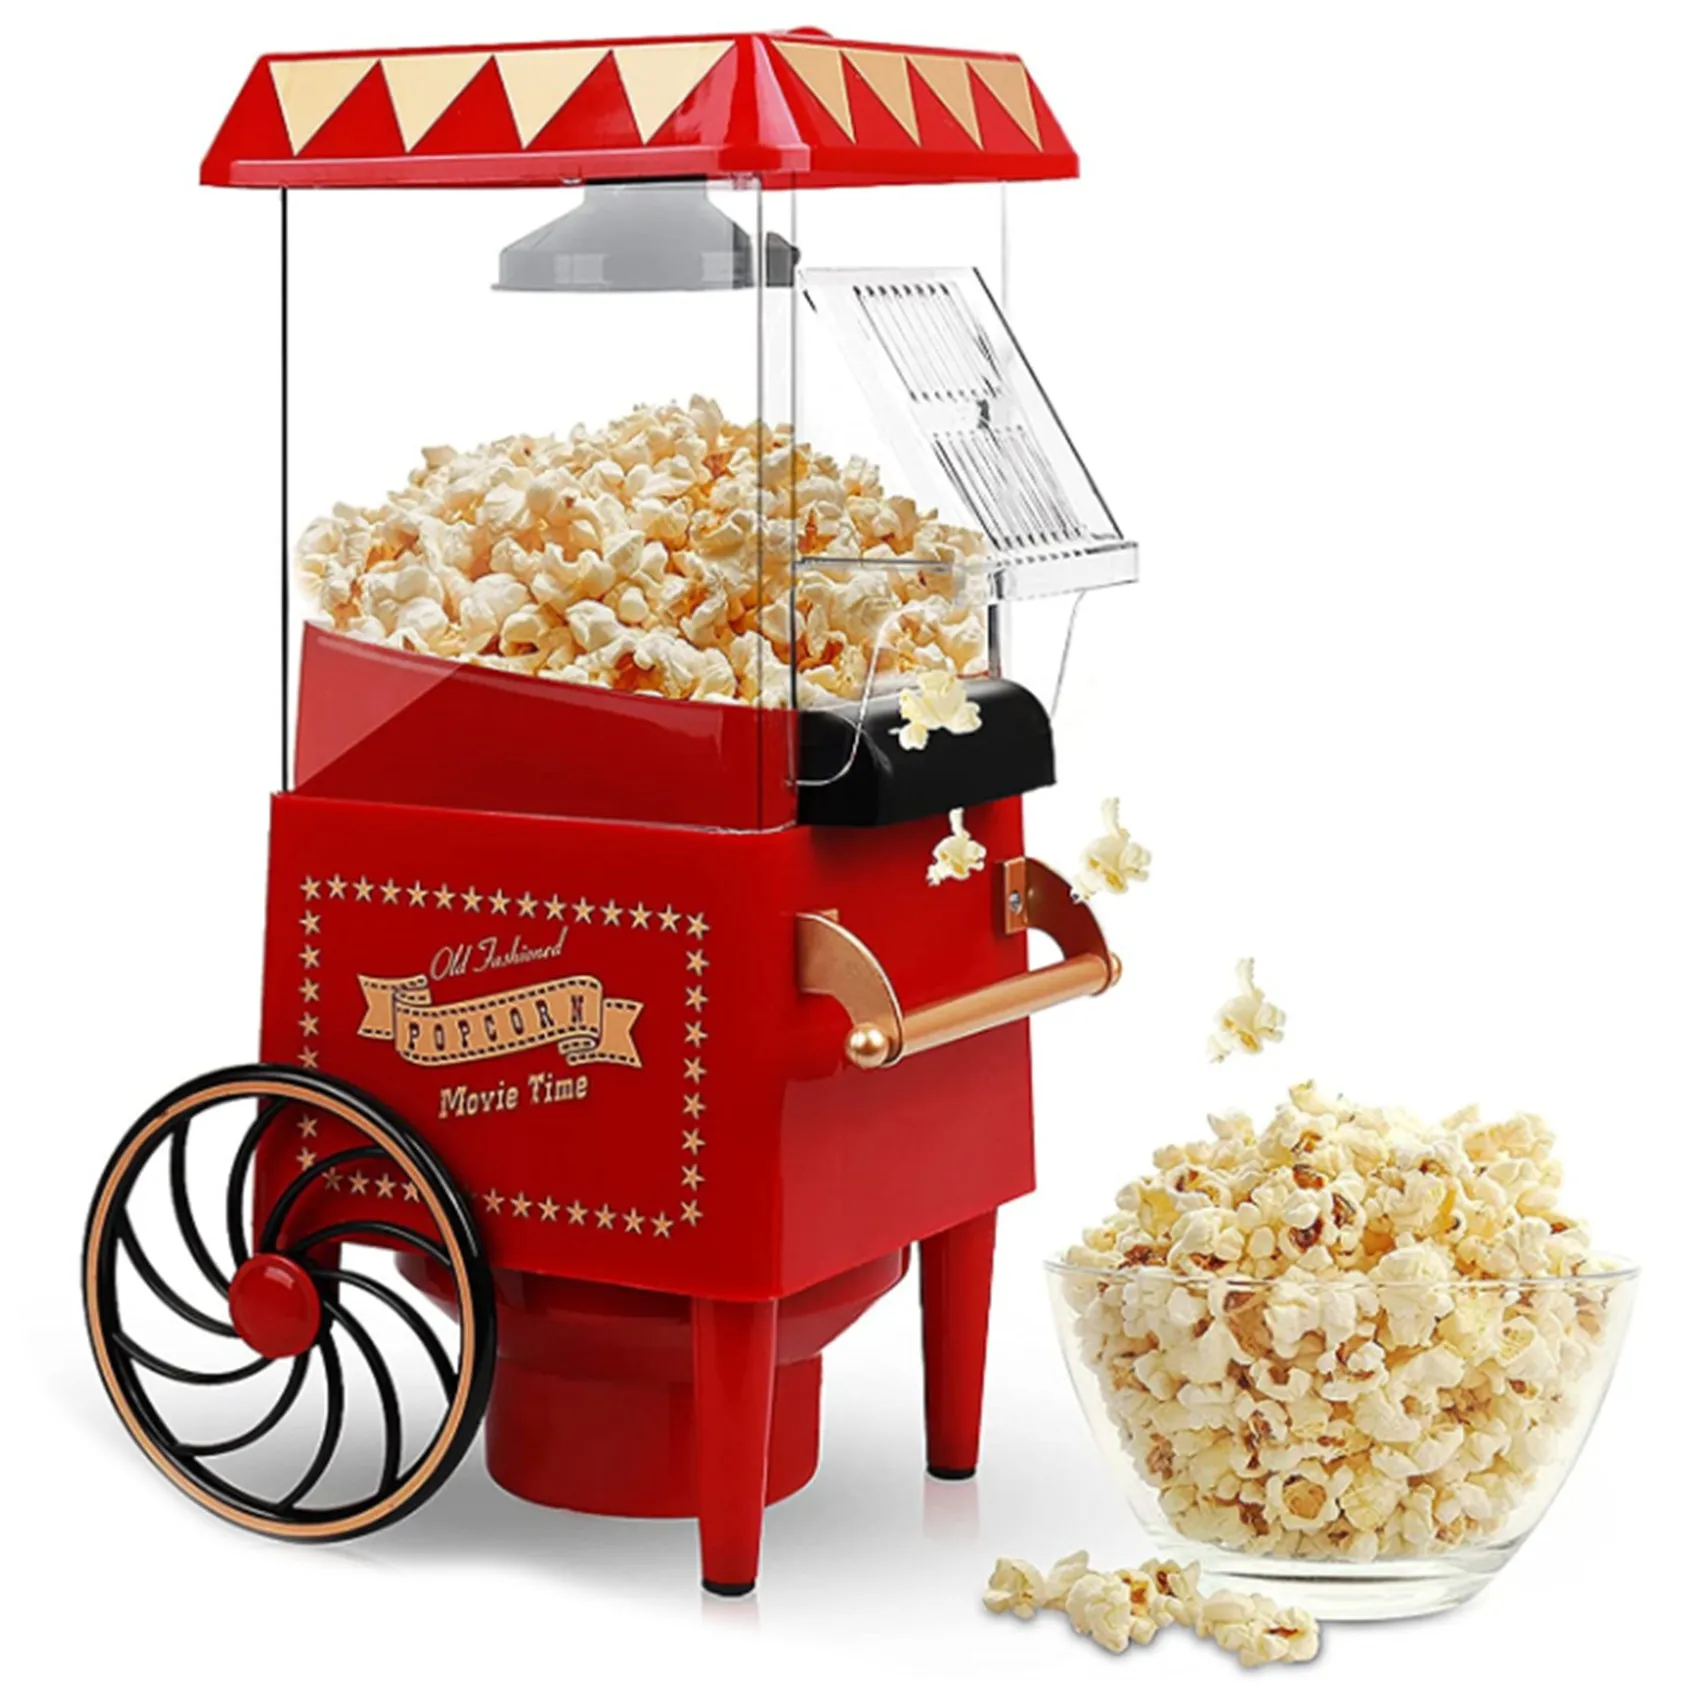 Popcorn Maker,Hot Air Popcorn Machine Vintage Tabletop Electric Popcorn Popper, Healthy and Quick Snack for Home EU Plug